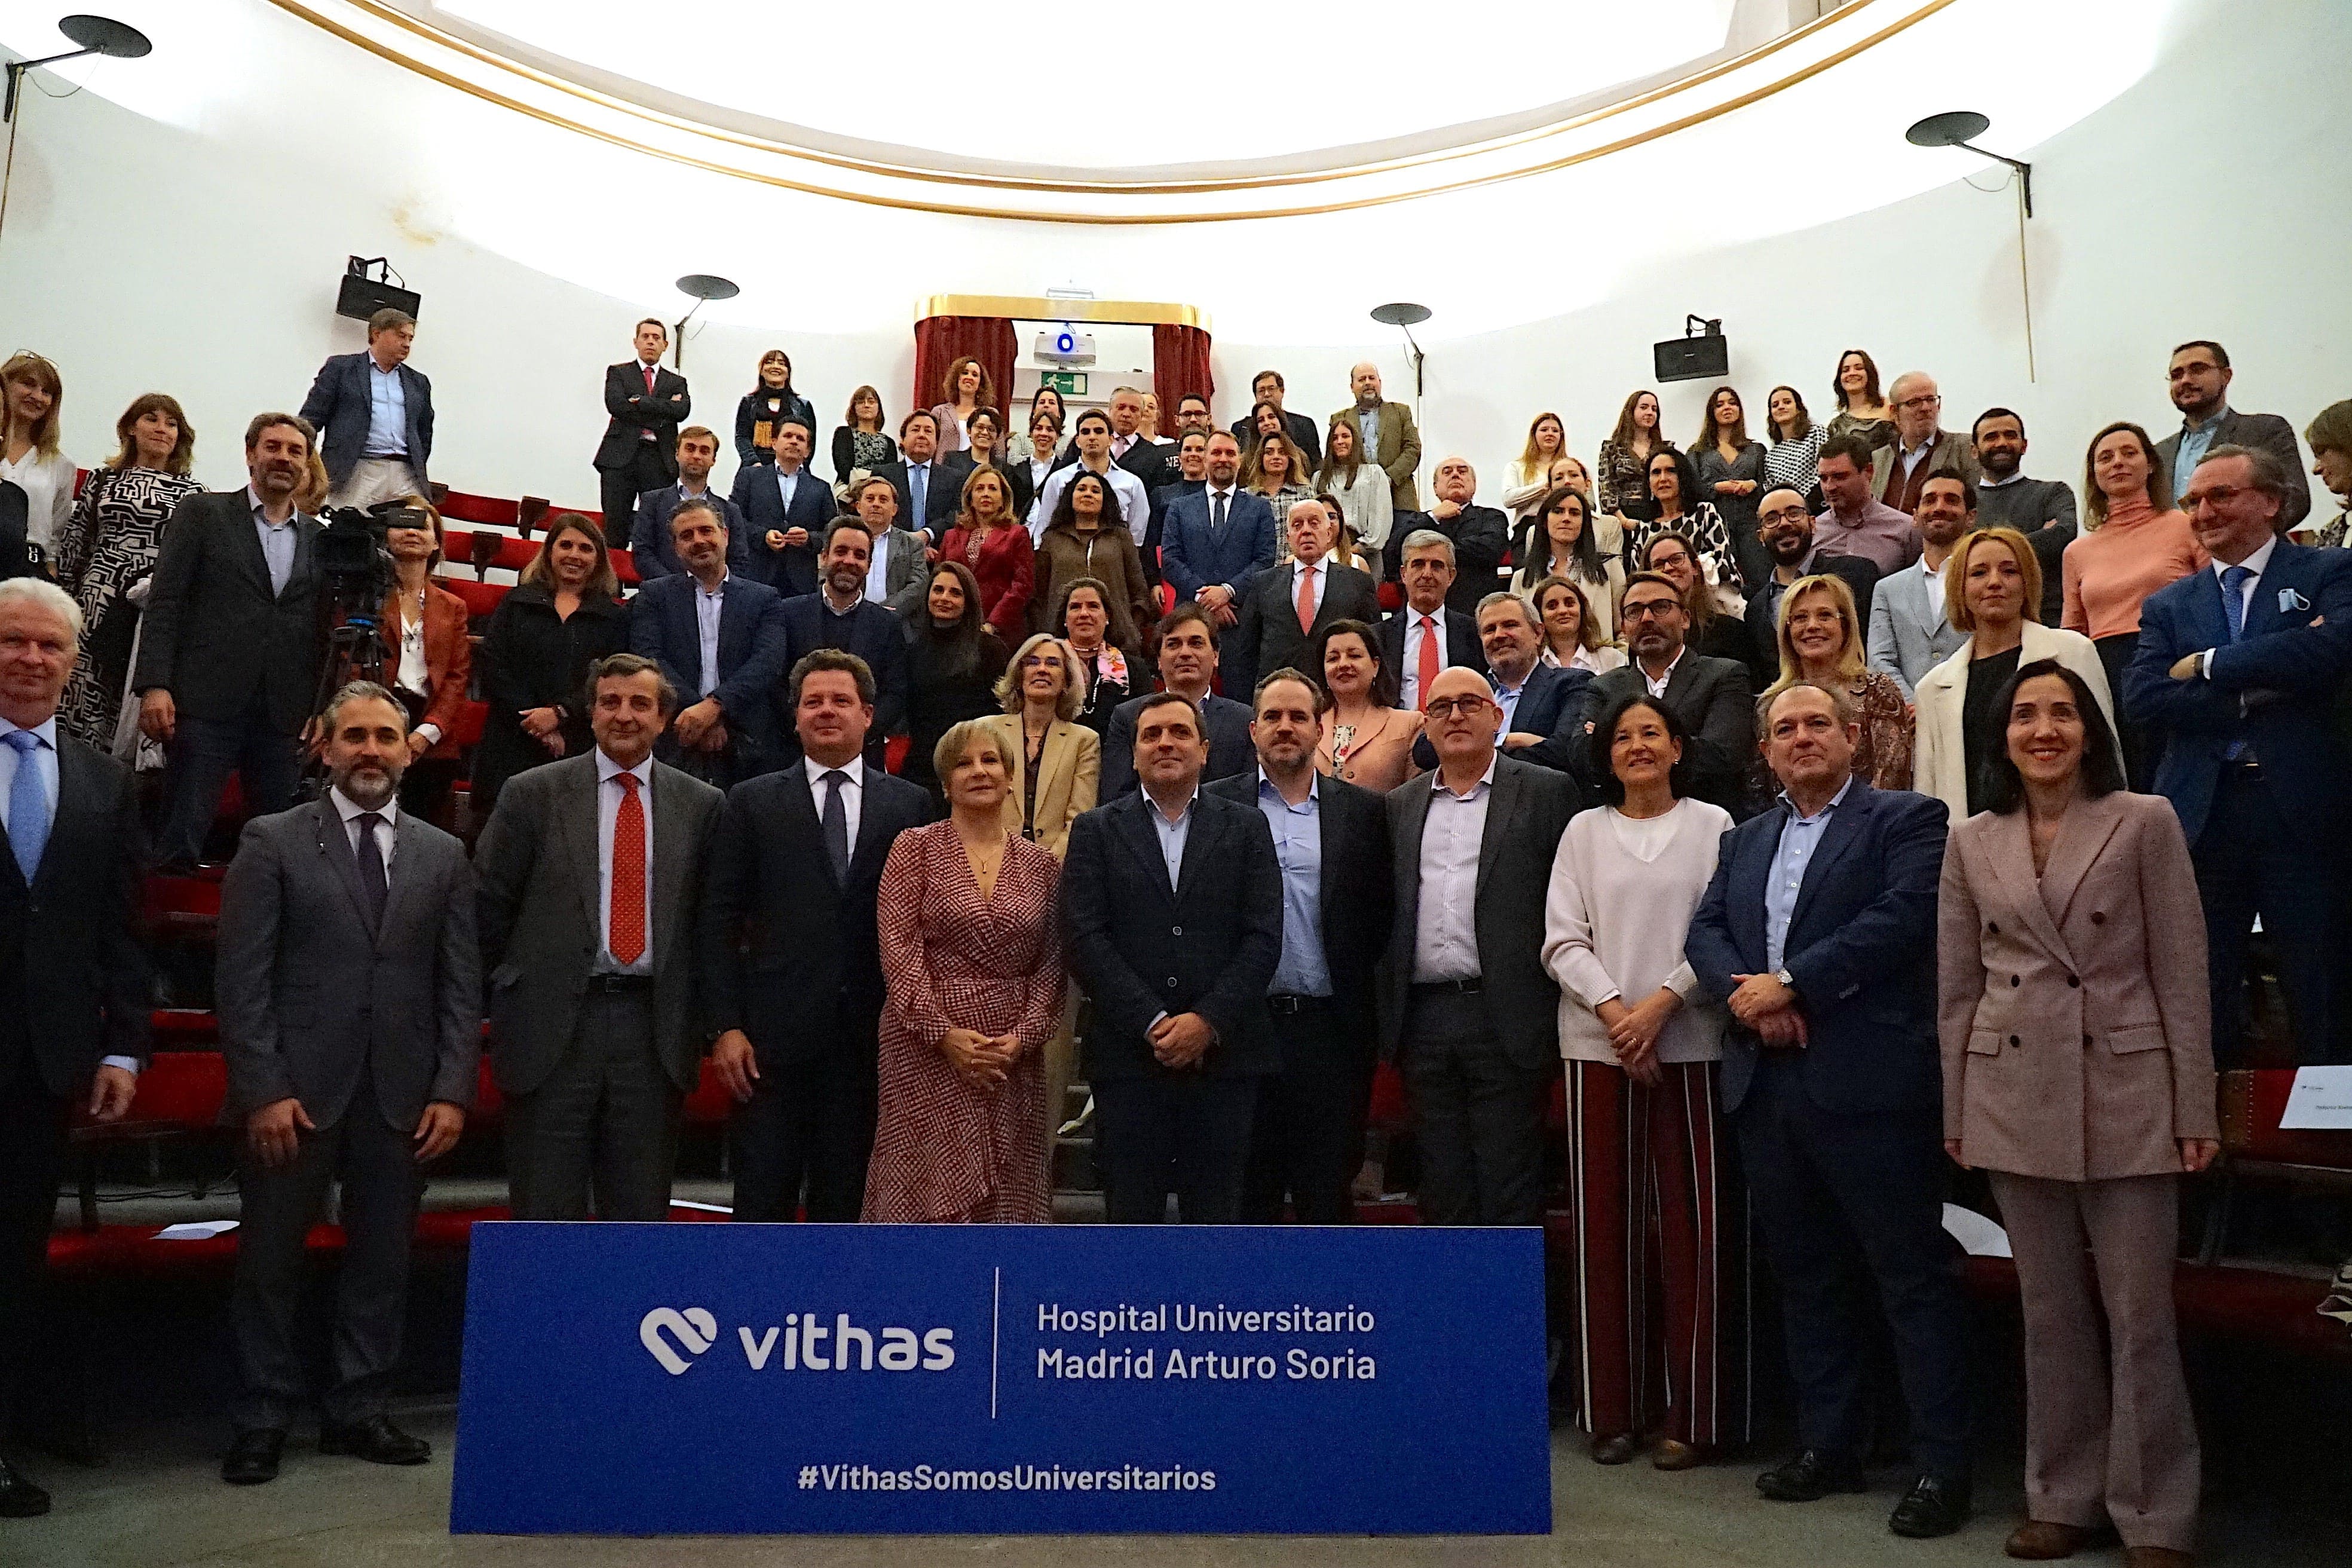 Family photo of the presentation event of the Vithas Madrid Arturo Soria University Hospital that took place in November.